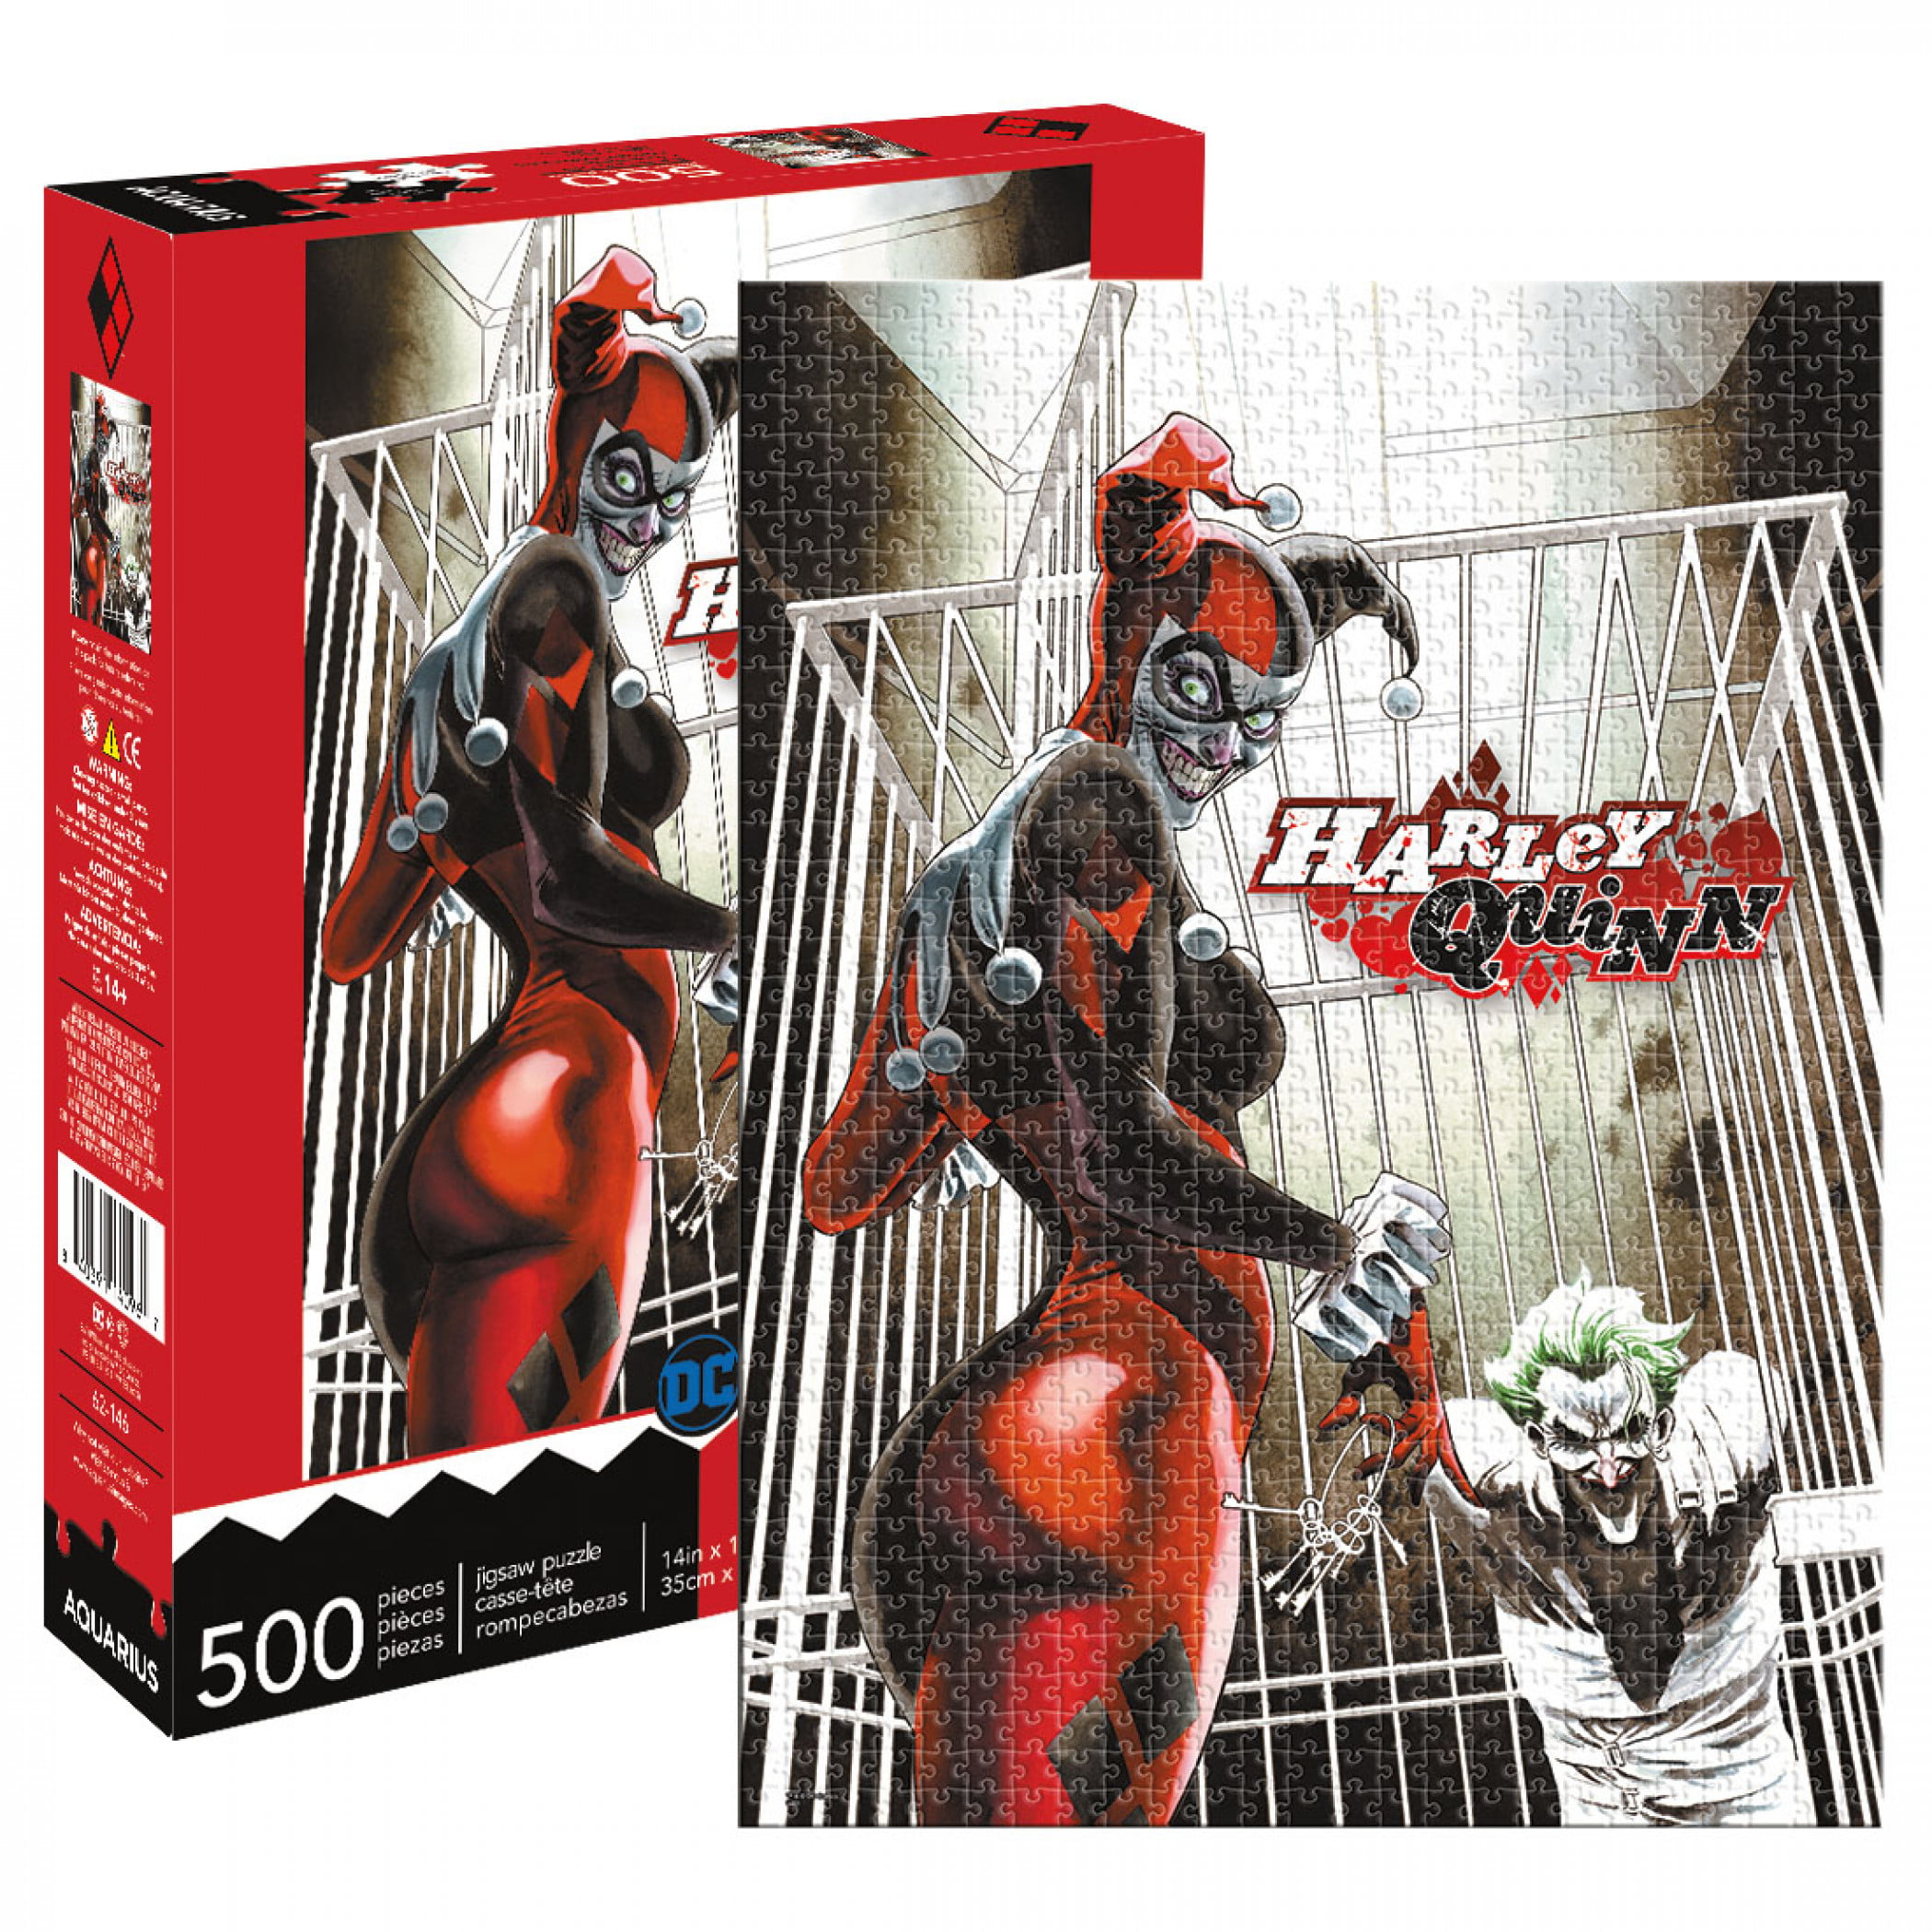 SDToys Puzzle 1000 Teile DC Comics Joker and Harley Quinn 24114 